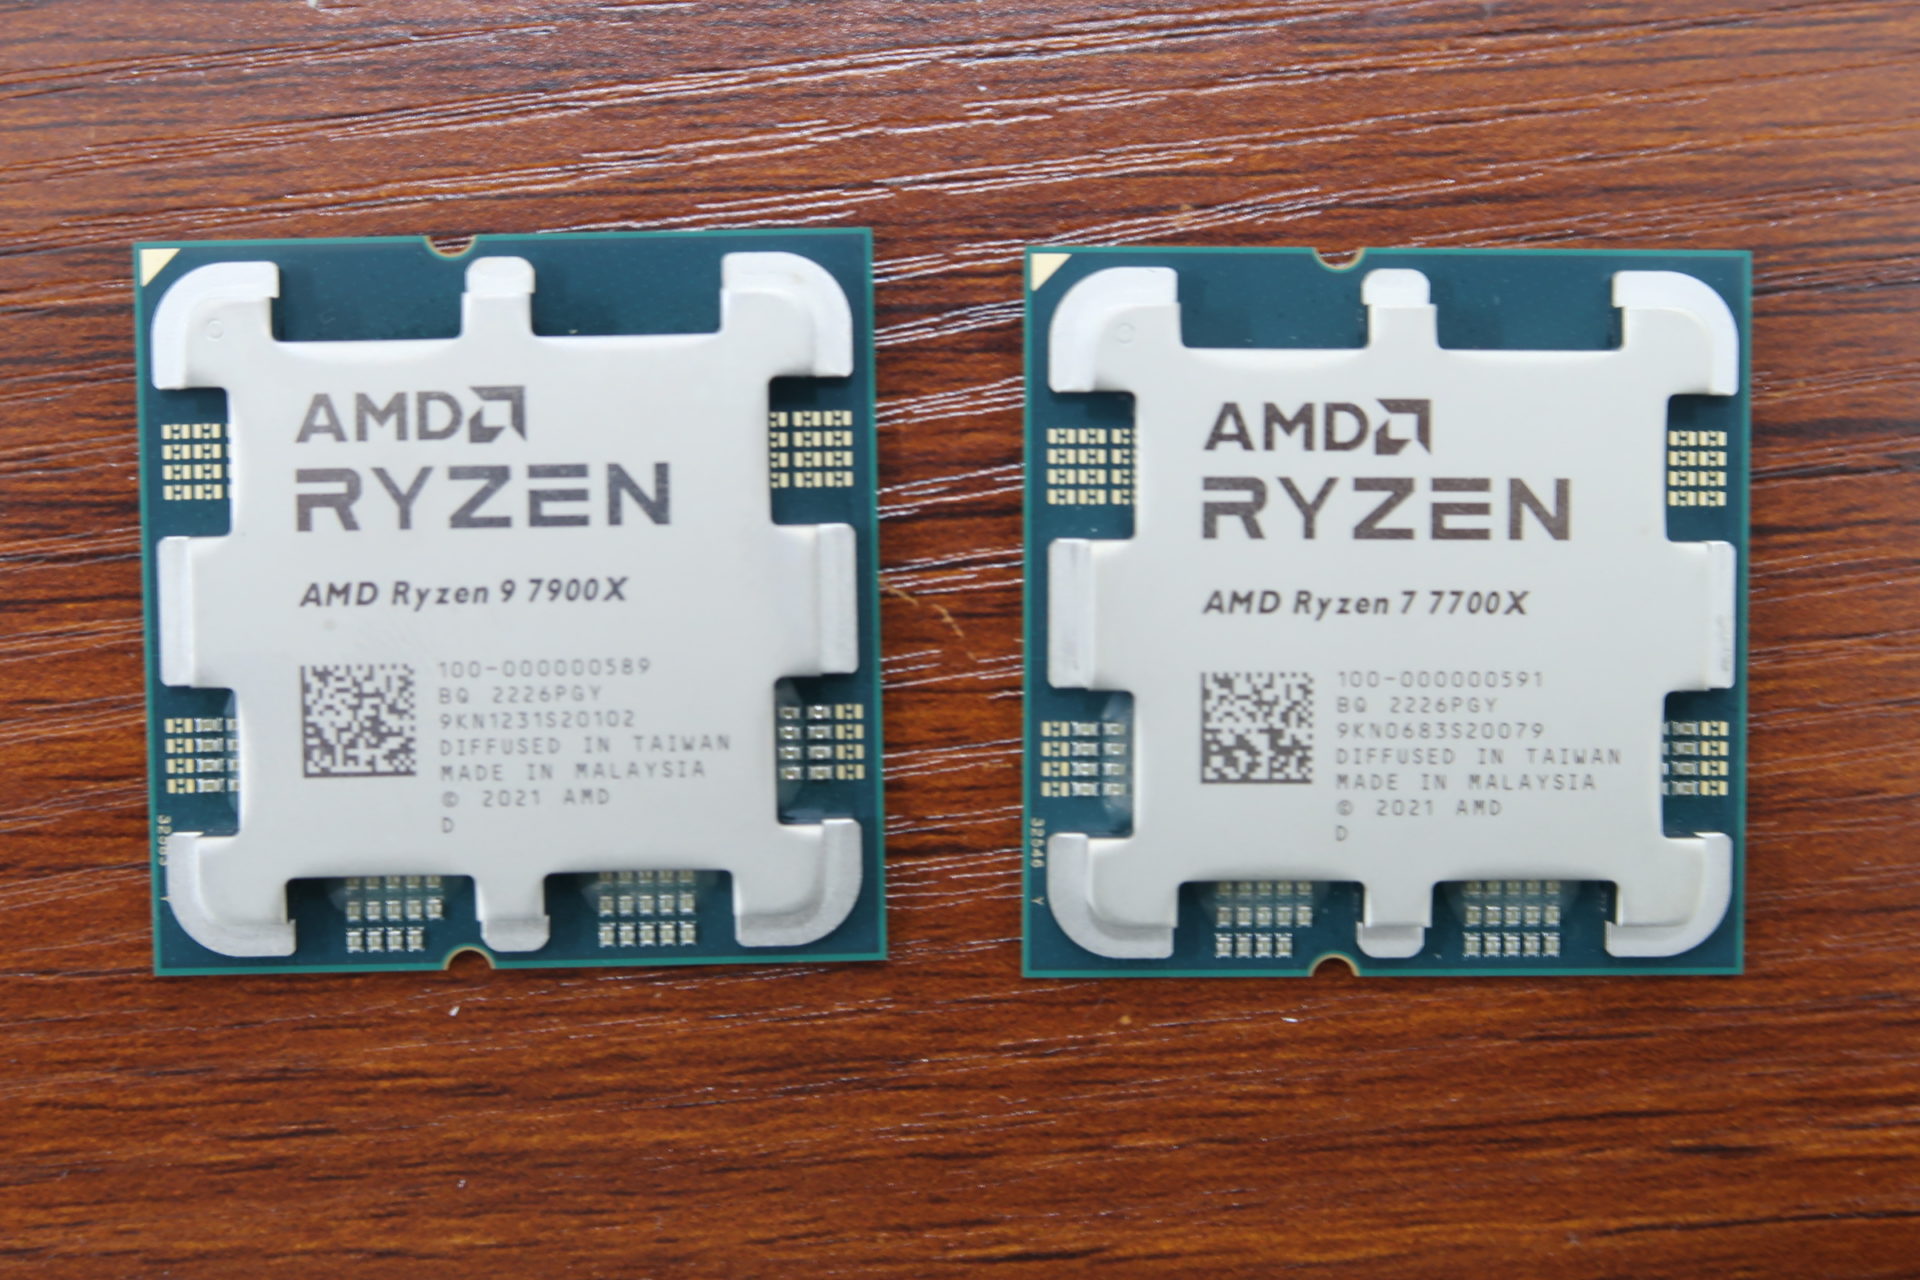 AMD Ryzen 9 7900X and Ryzen 7 7700X Review - More than what you'd